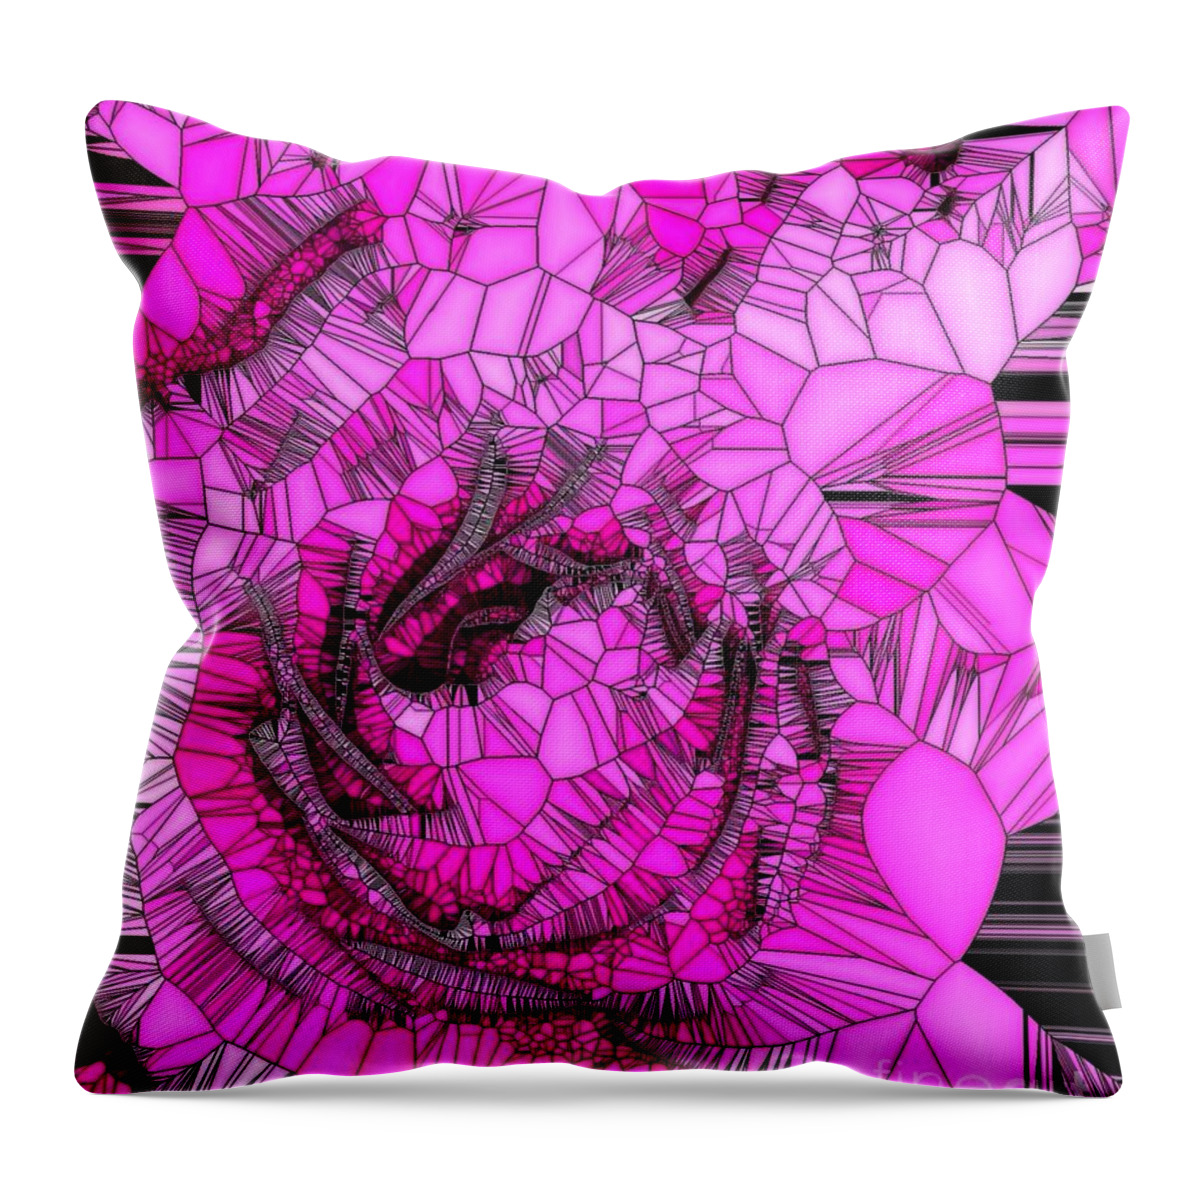 Rose Throw Pillow featuring the photograph Abstract Pink Rose Mosaic by Saundra Myles